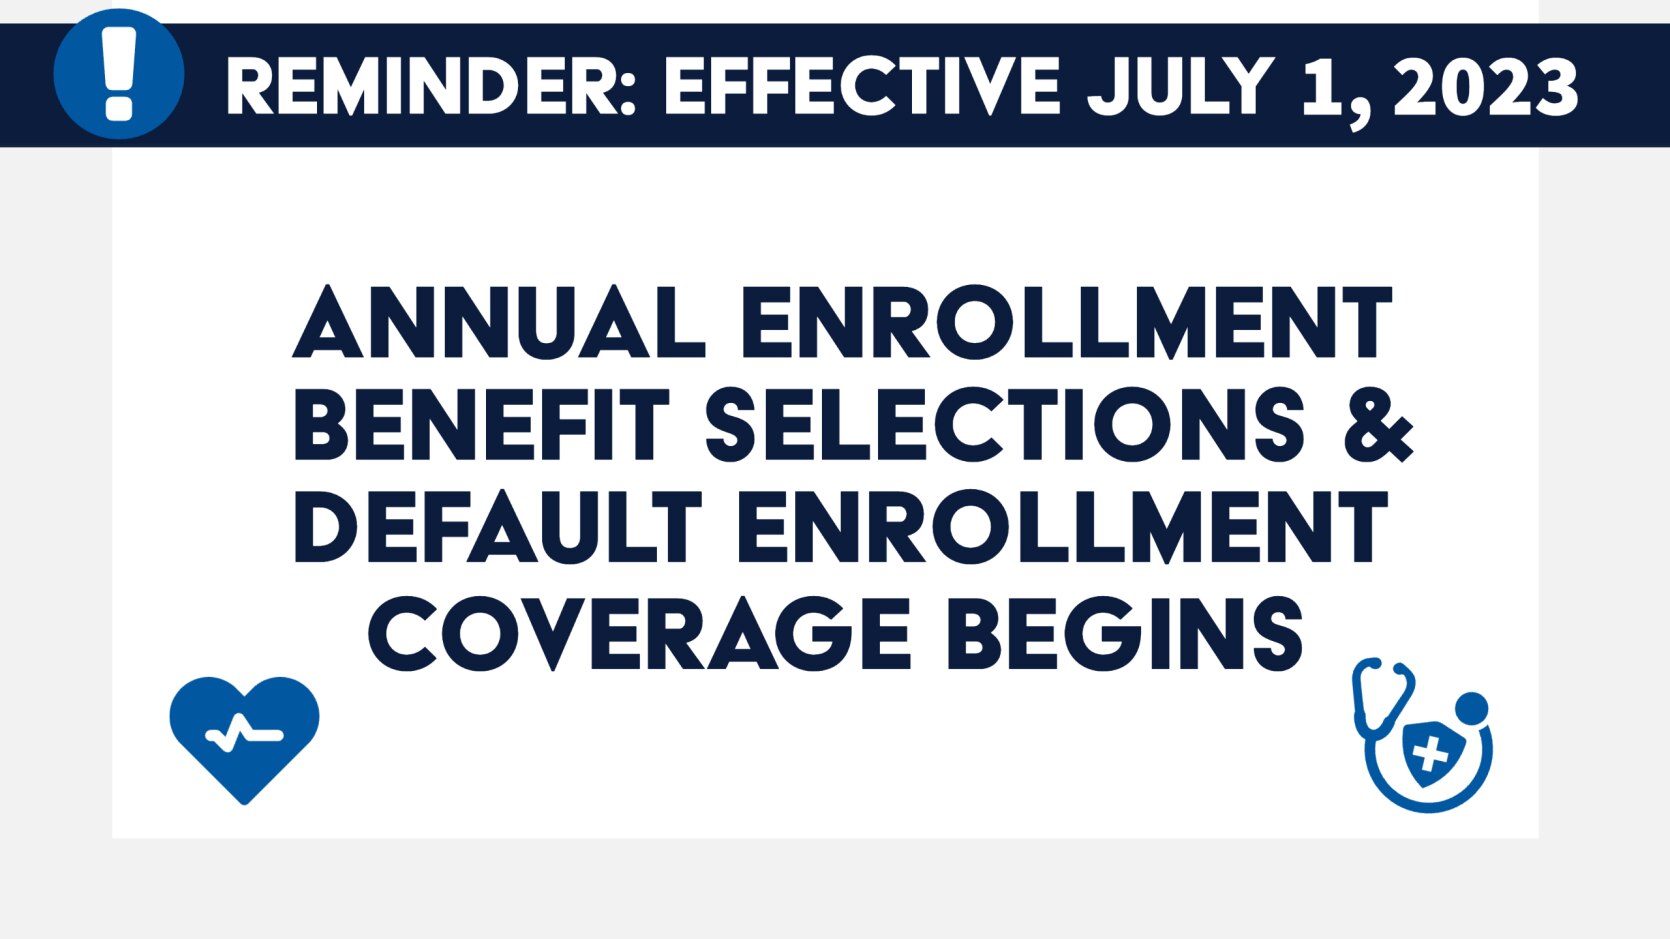 annual enrollment benefit selections and default enrollment coverage is effective july 1, 2023